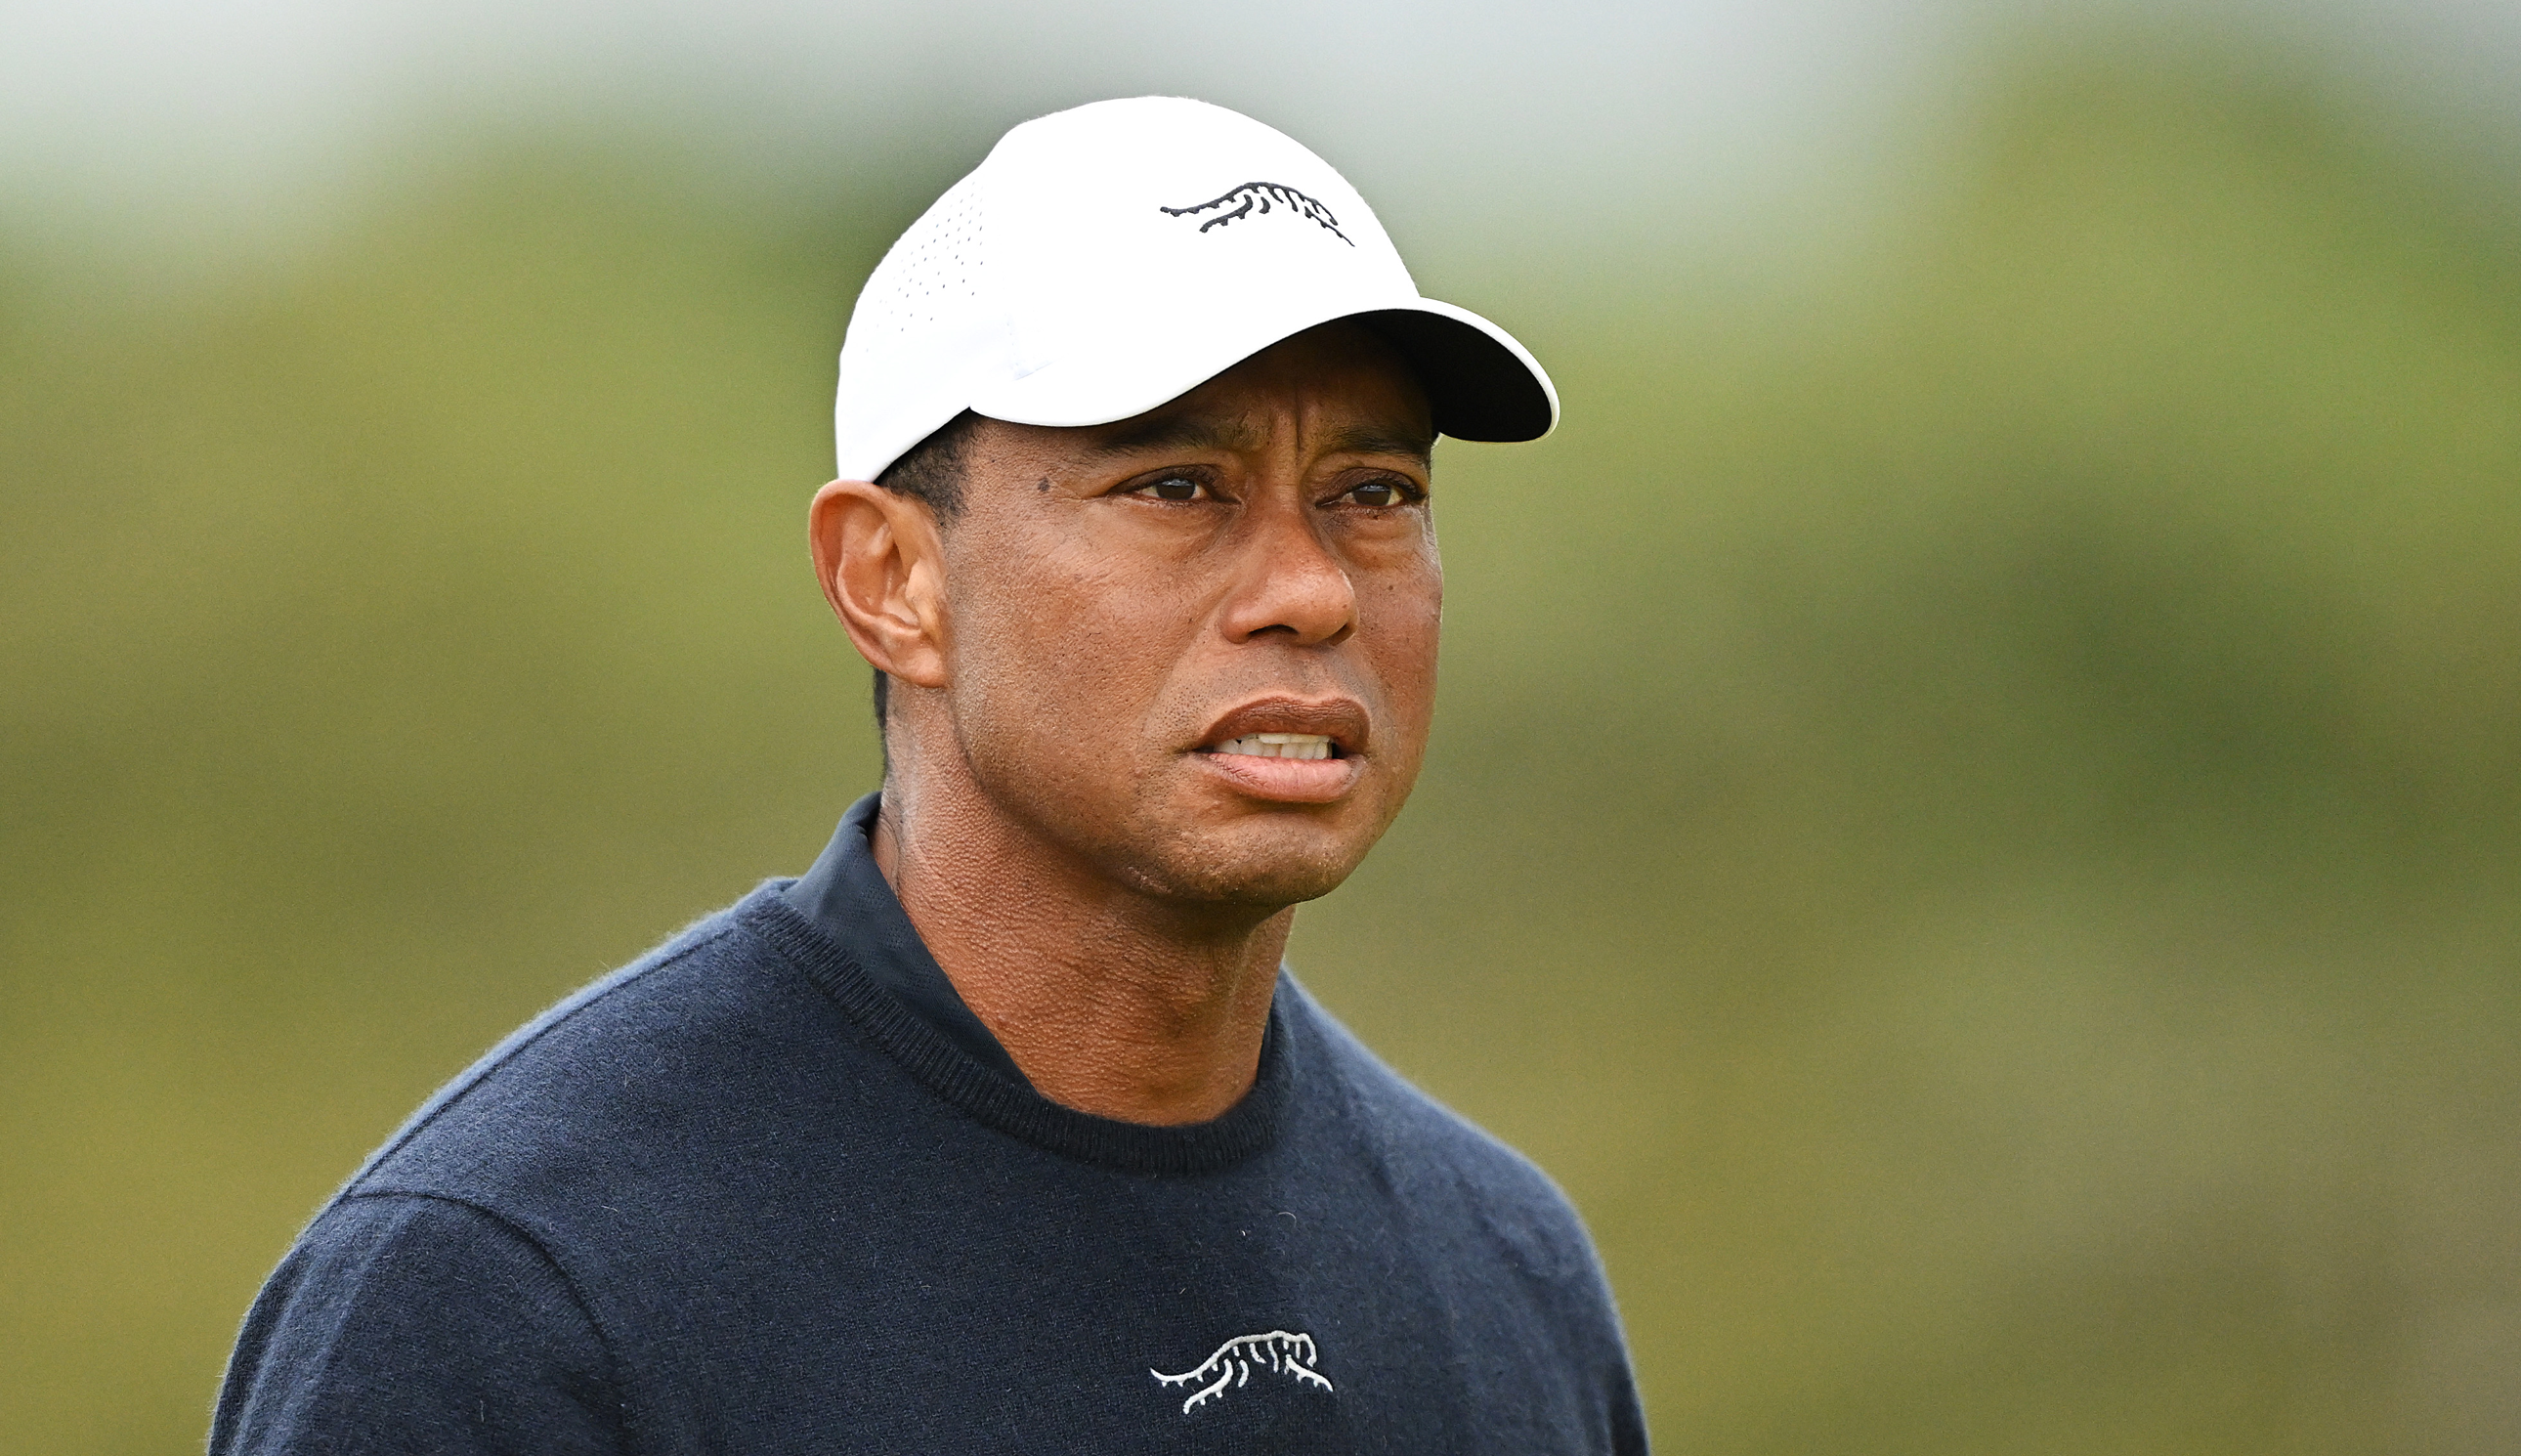 Tiger Woods Falls To Third Consecutive Major Missed Cut At The Open